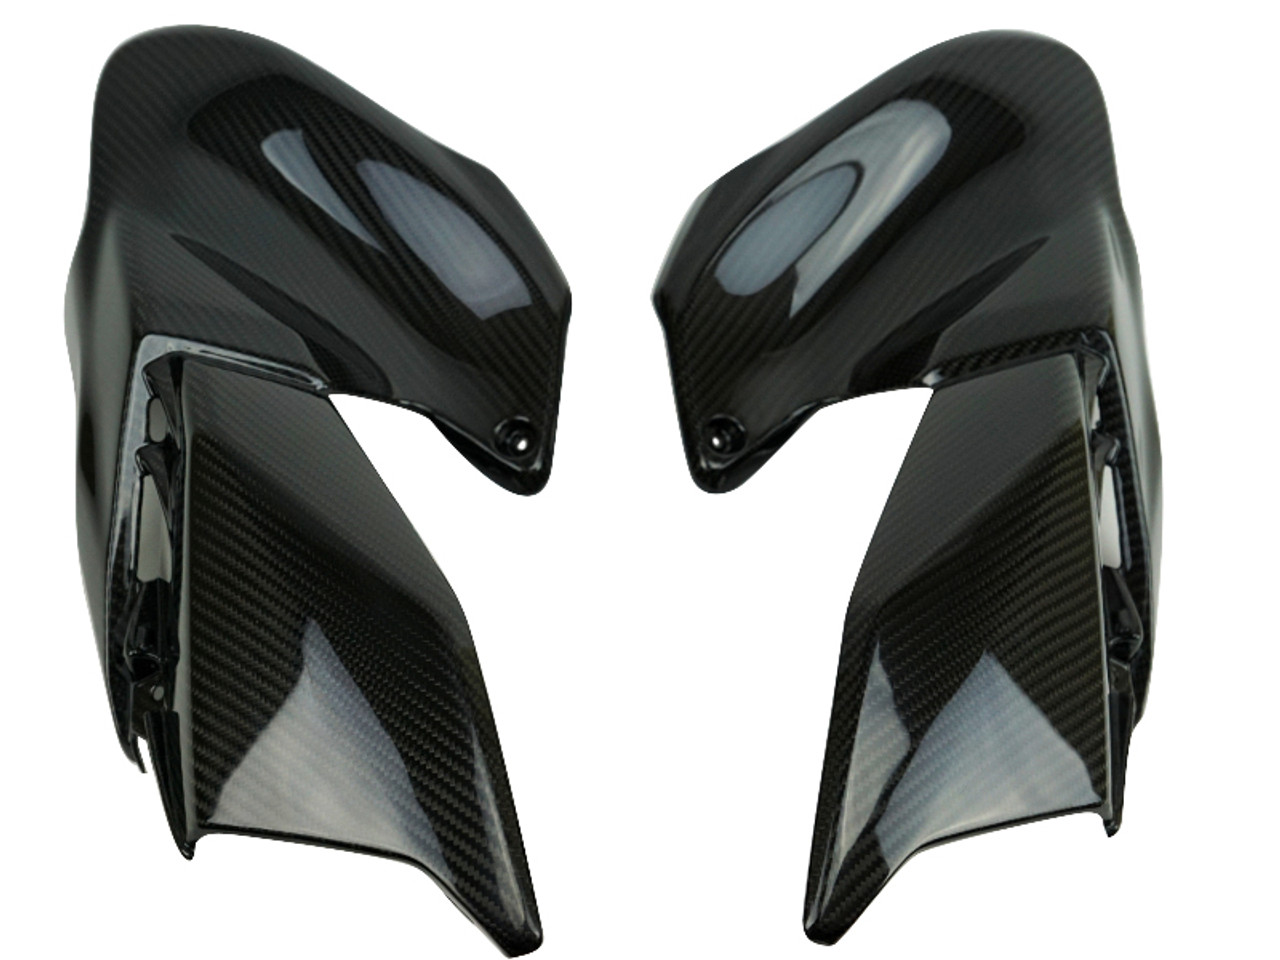 Tank Side Covers in Glossy Twill Weave Carbon Fiber for Kawasaki Z900 2020+